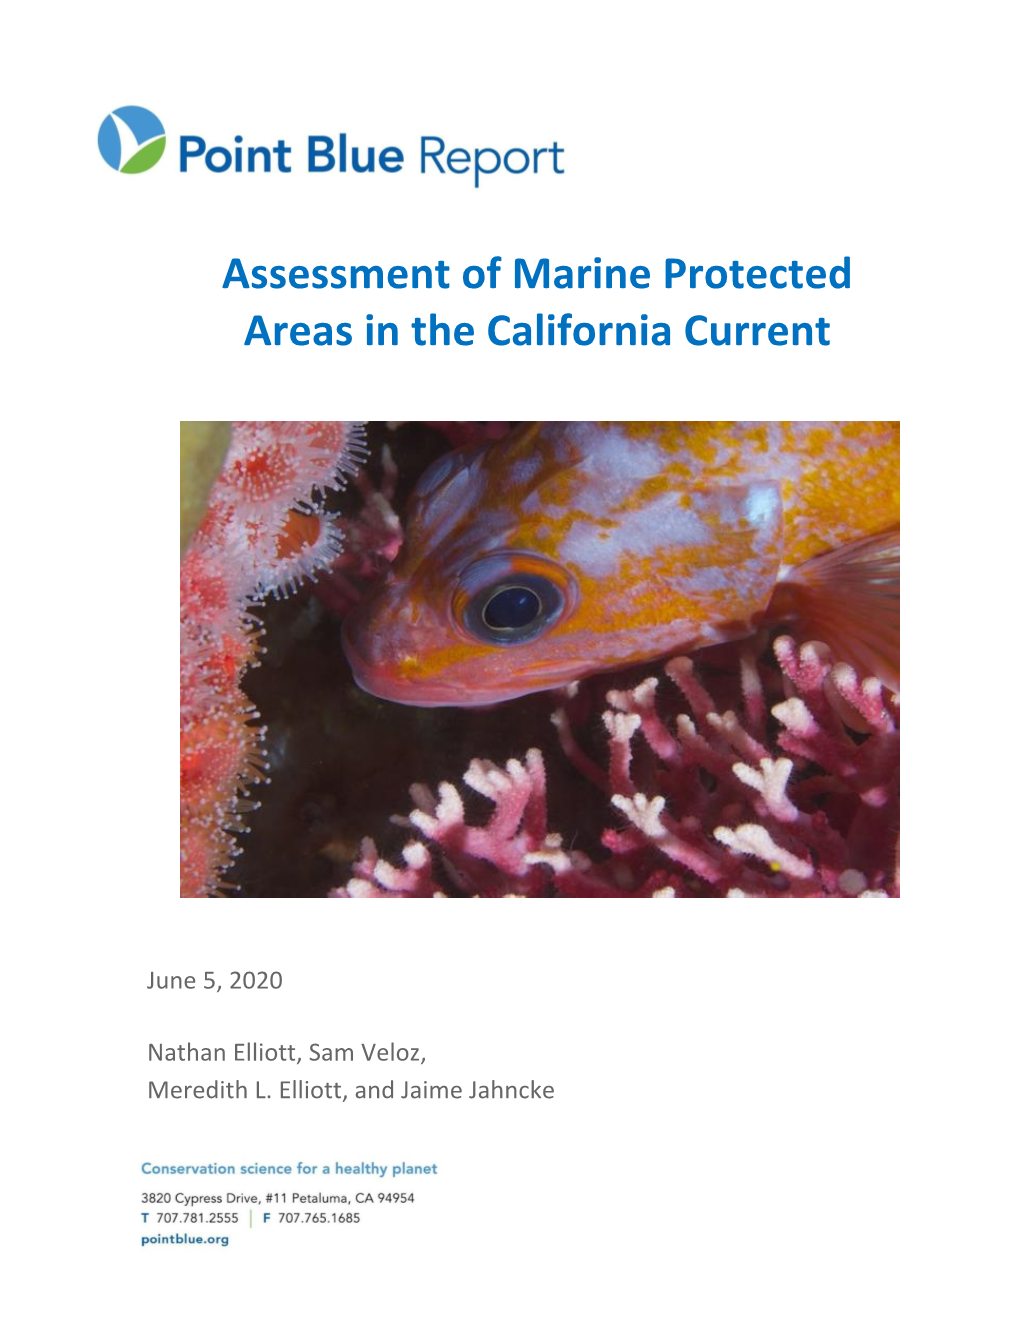 Assessment of Marine Protected Areas in the California Current